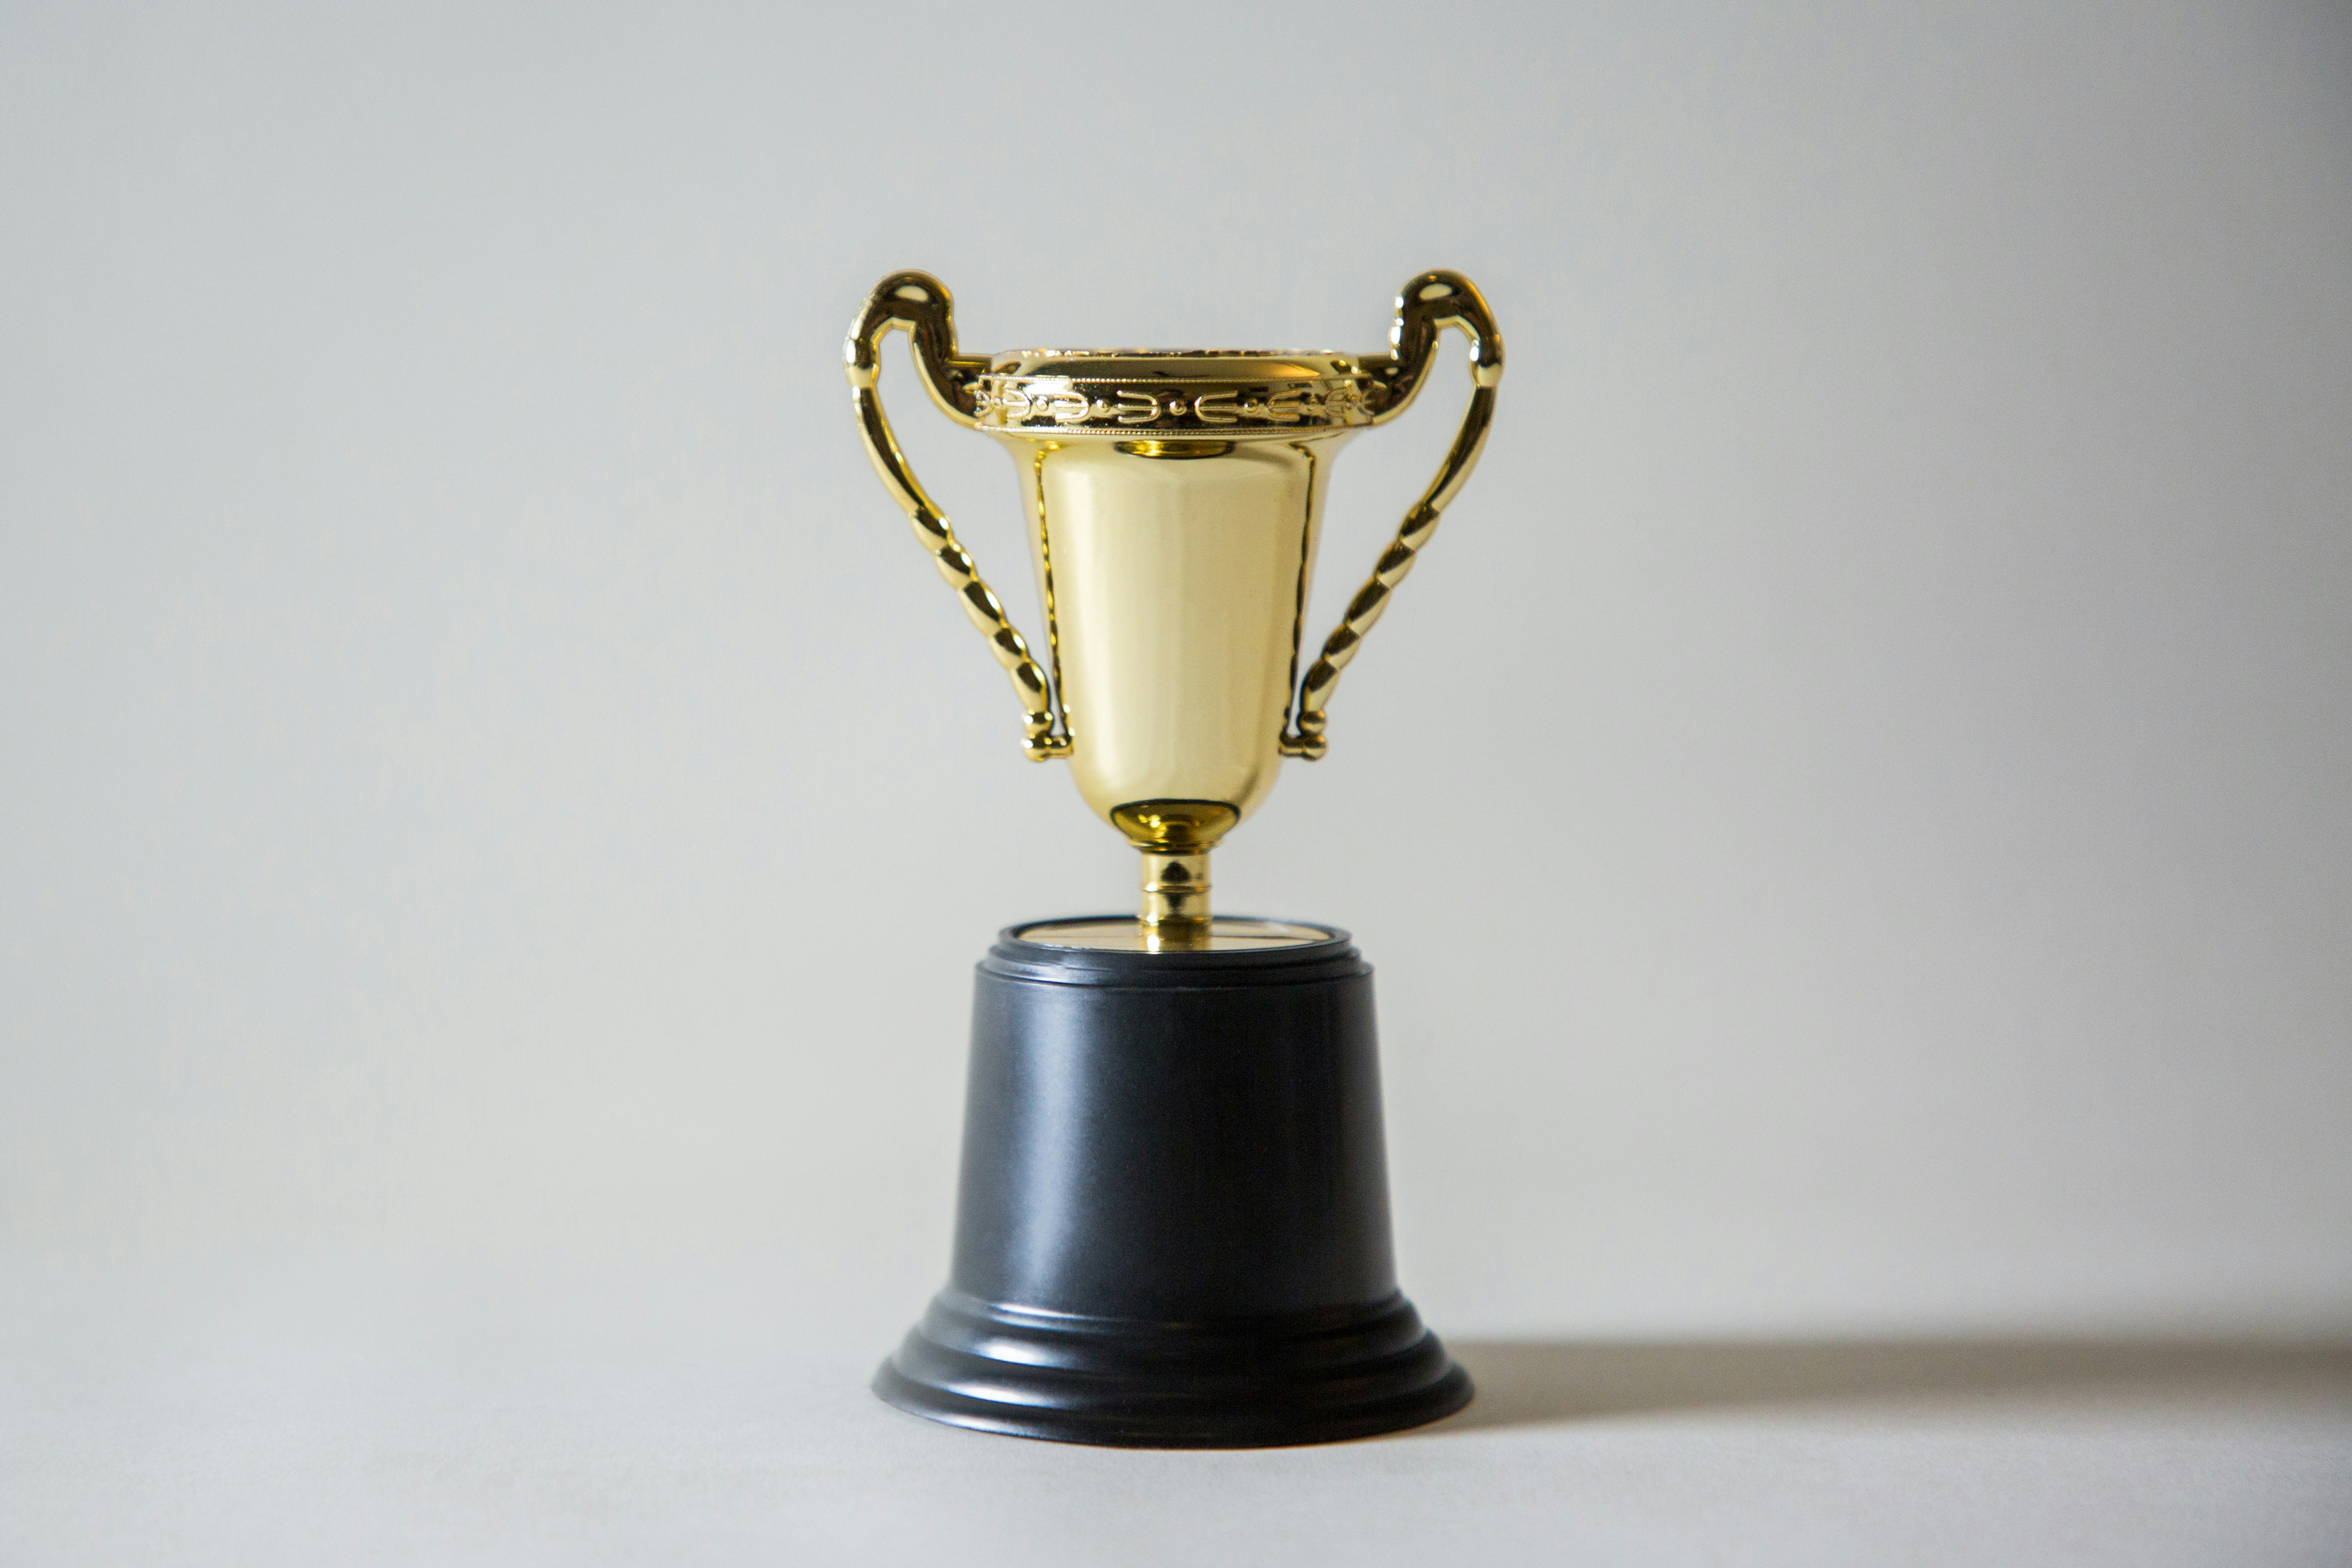 A small gold award cup sits in front of a white background